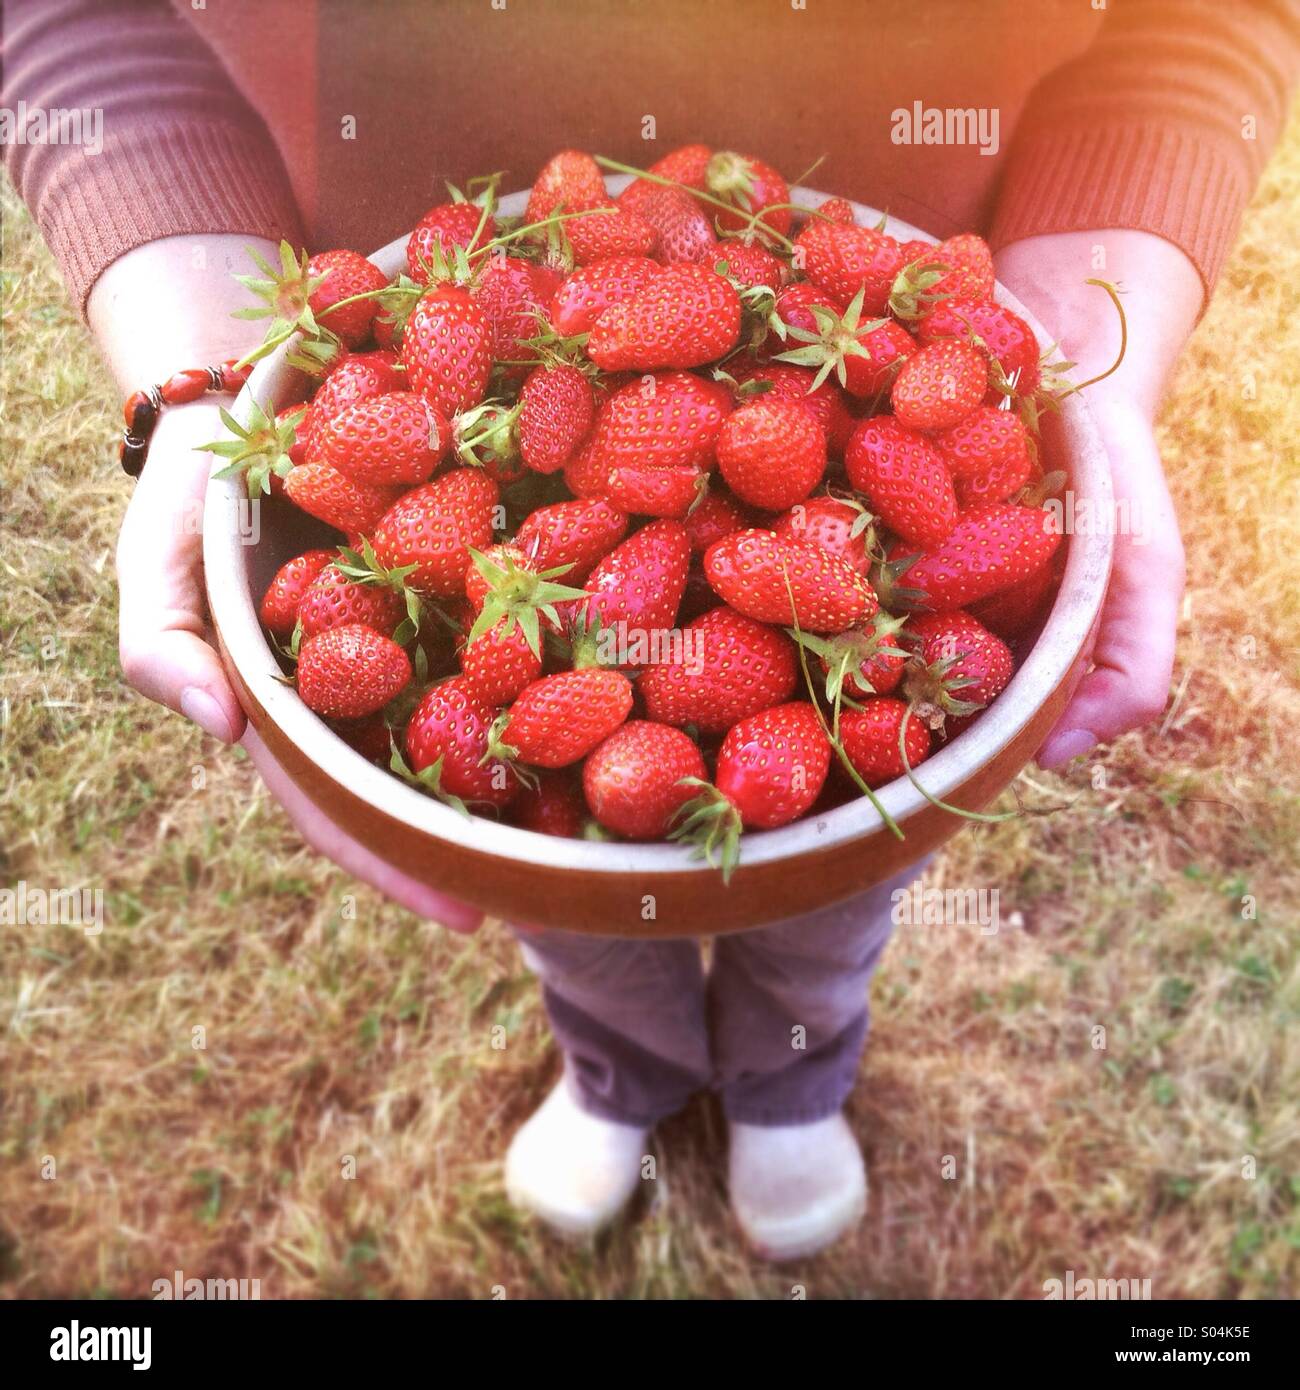 Woman holding large bowl of freshly picked ripe strawberries Stock Photo